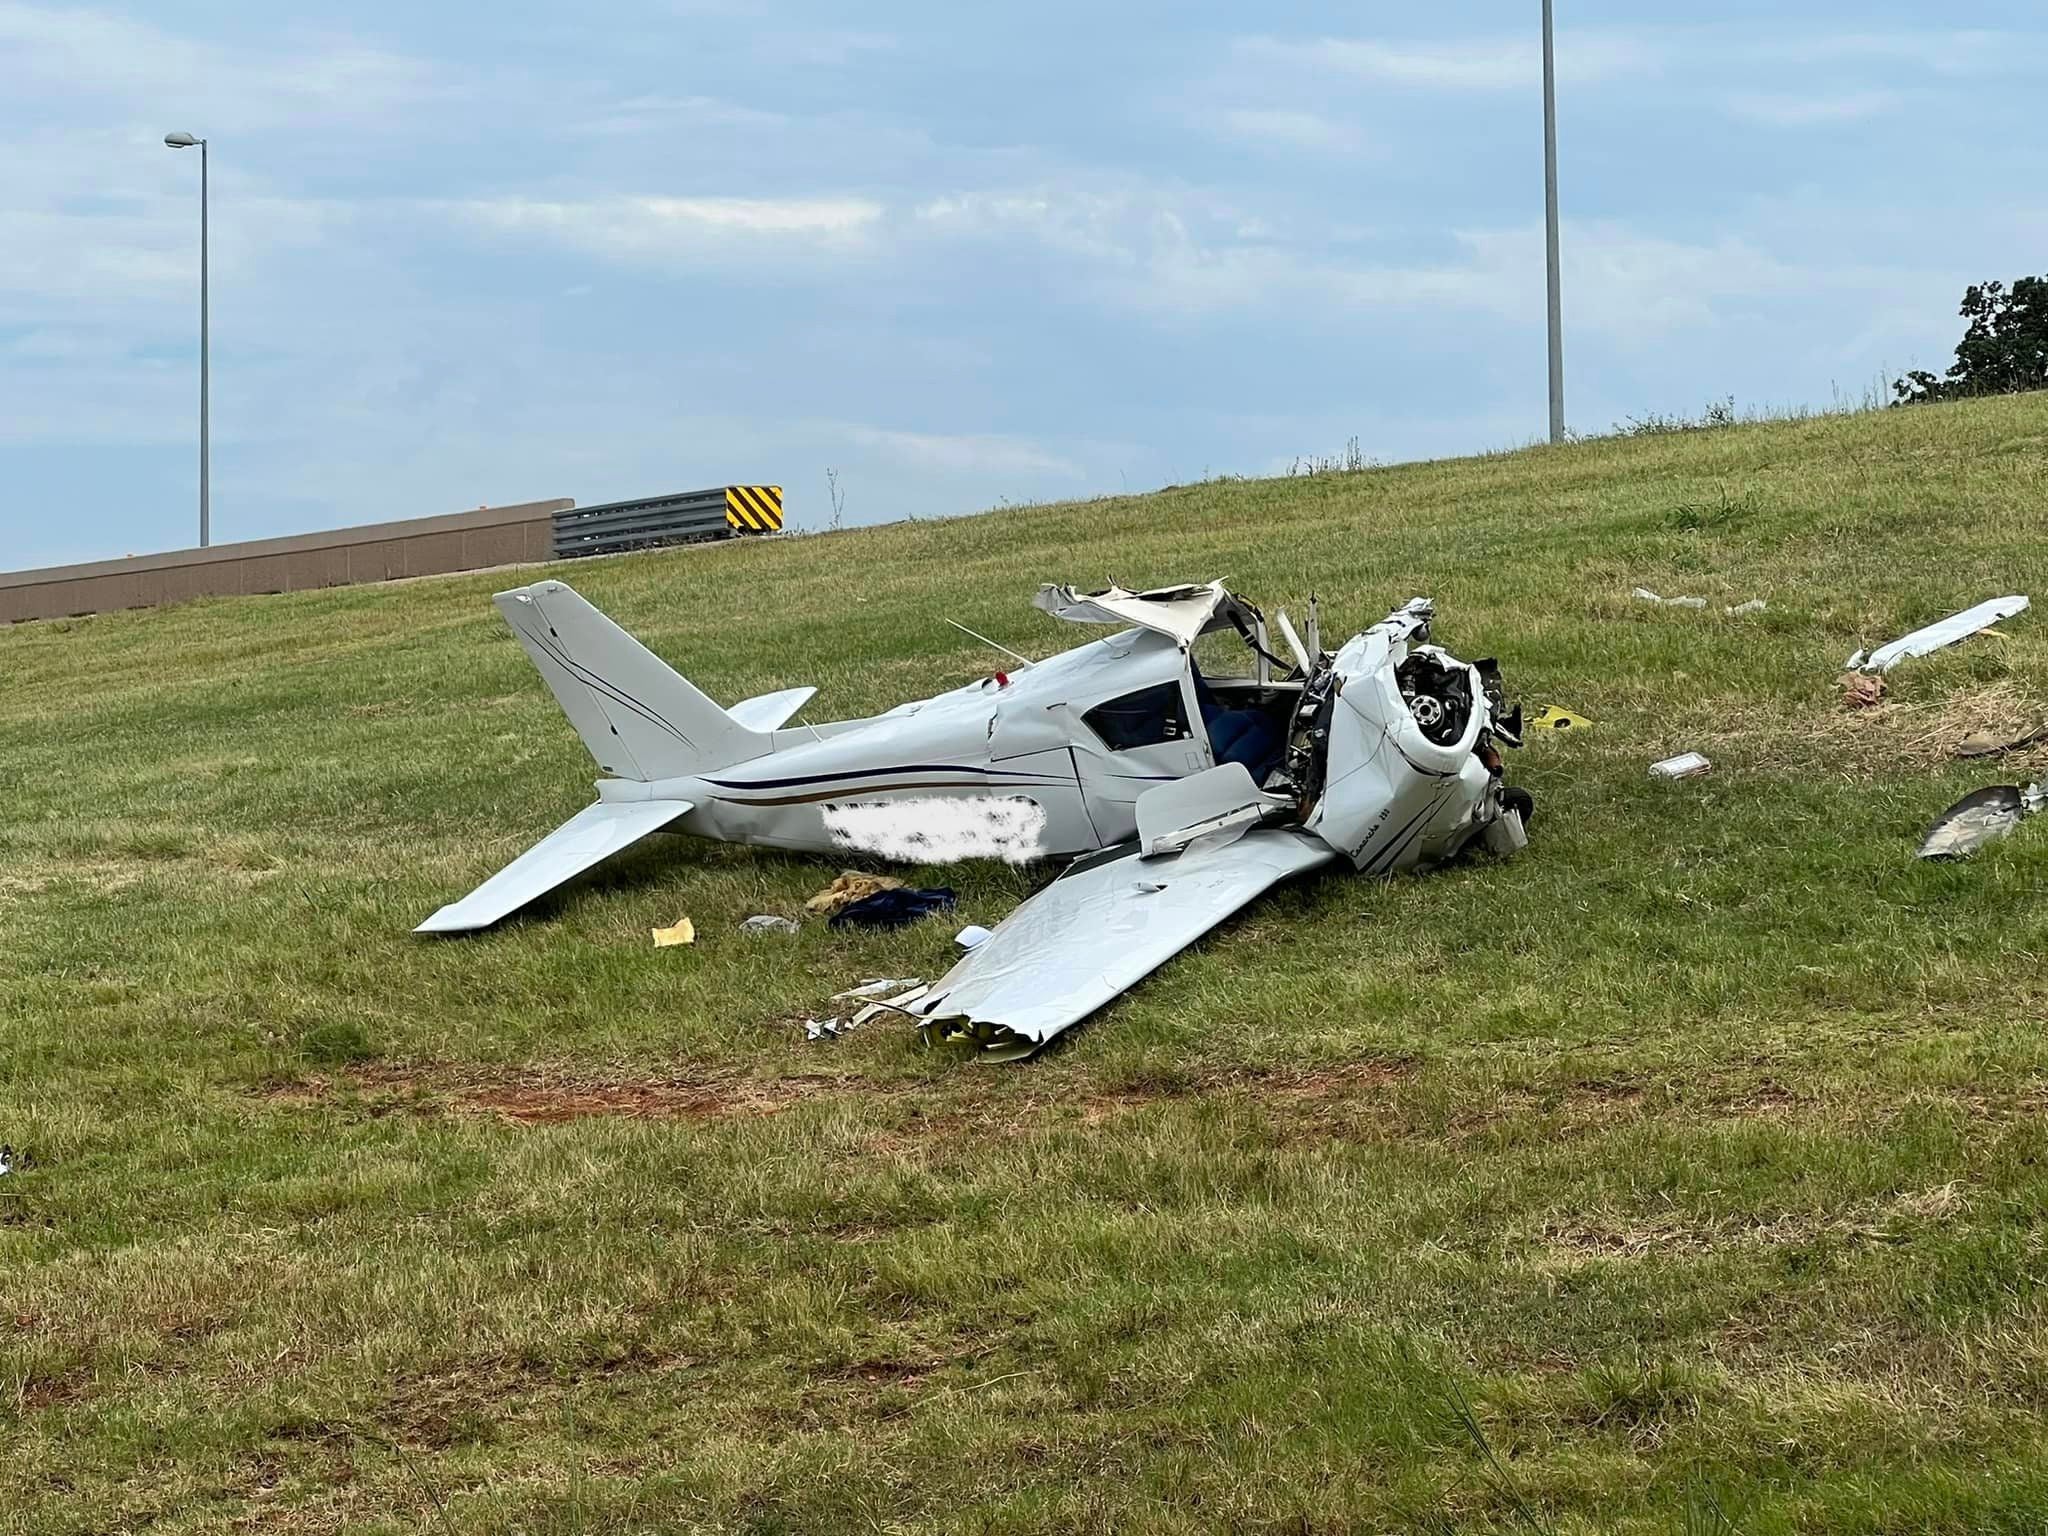 The pilot of a Piper plane may have been trying to make an emergency landing when he crashed near an Oklahoma interstate on Sunday, officials say